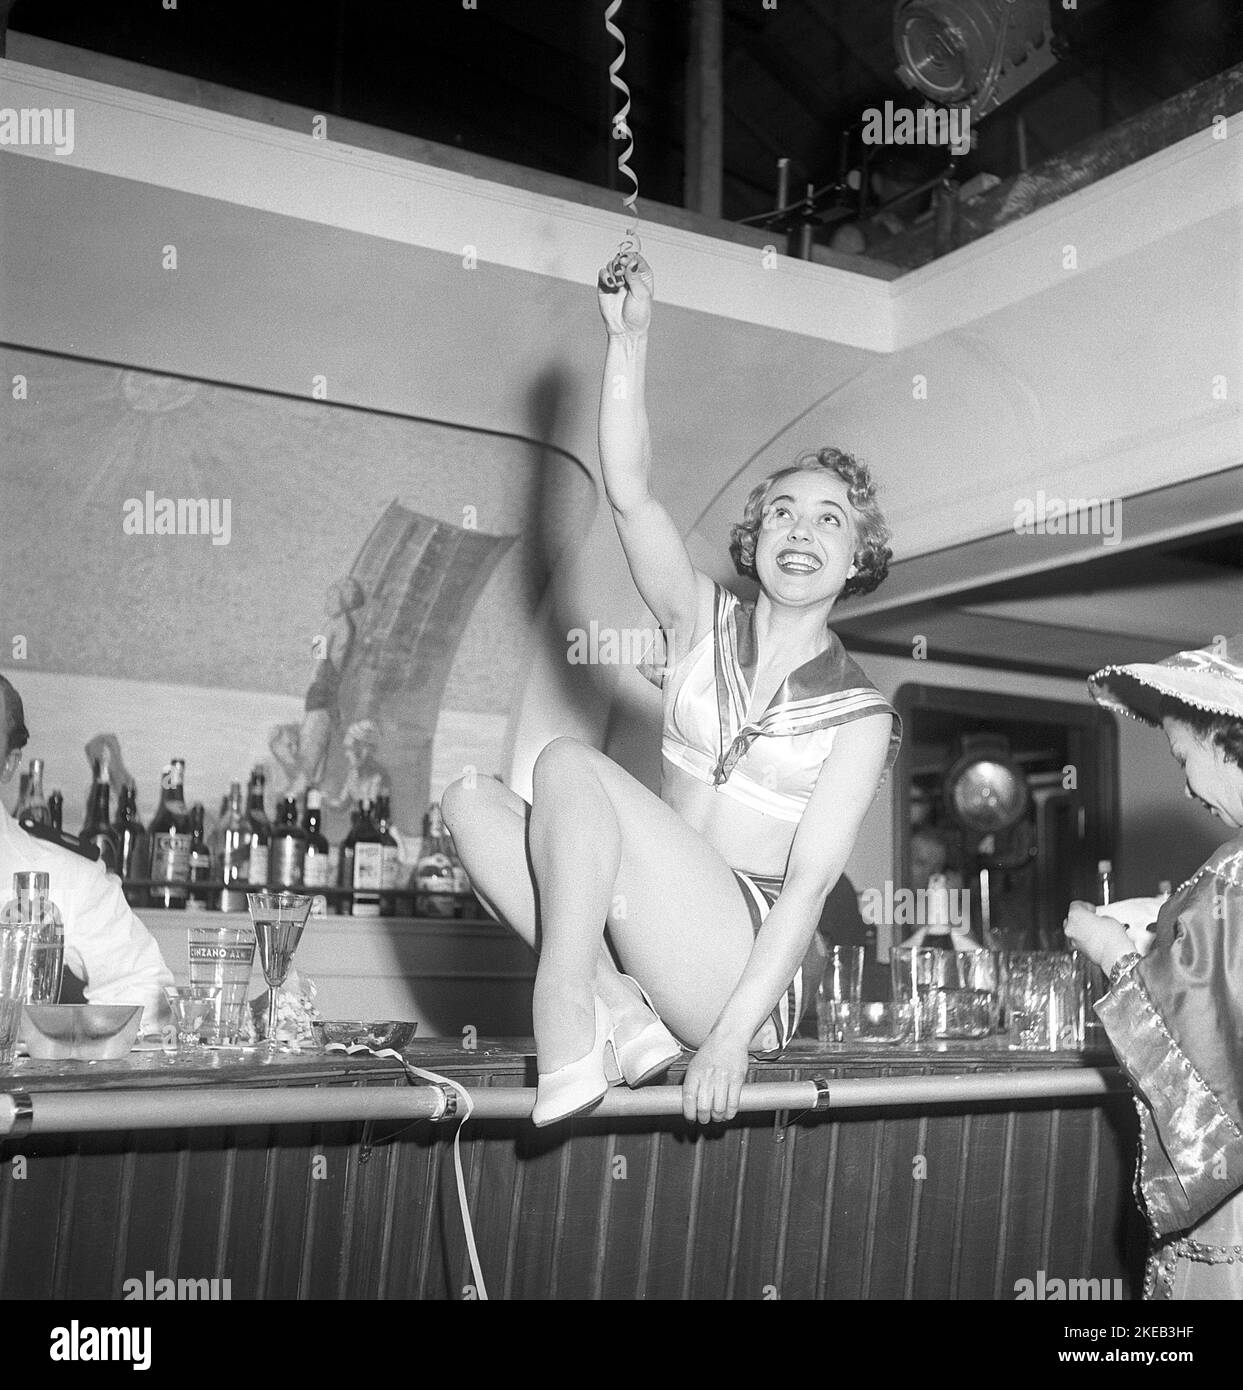 Party in the 1950s. A smiling young woman dressed in a costume however small, that resembles a sailor uniform, is sitting on top of the bar during a party at a filmstudio. Sweden 1950 Kristoffersson ref AX56-1 Stock Photo